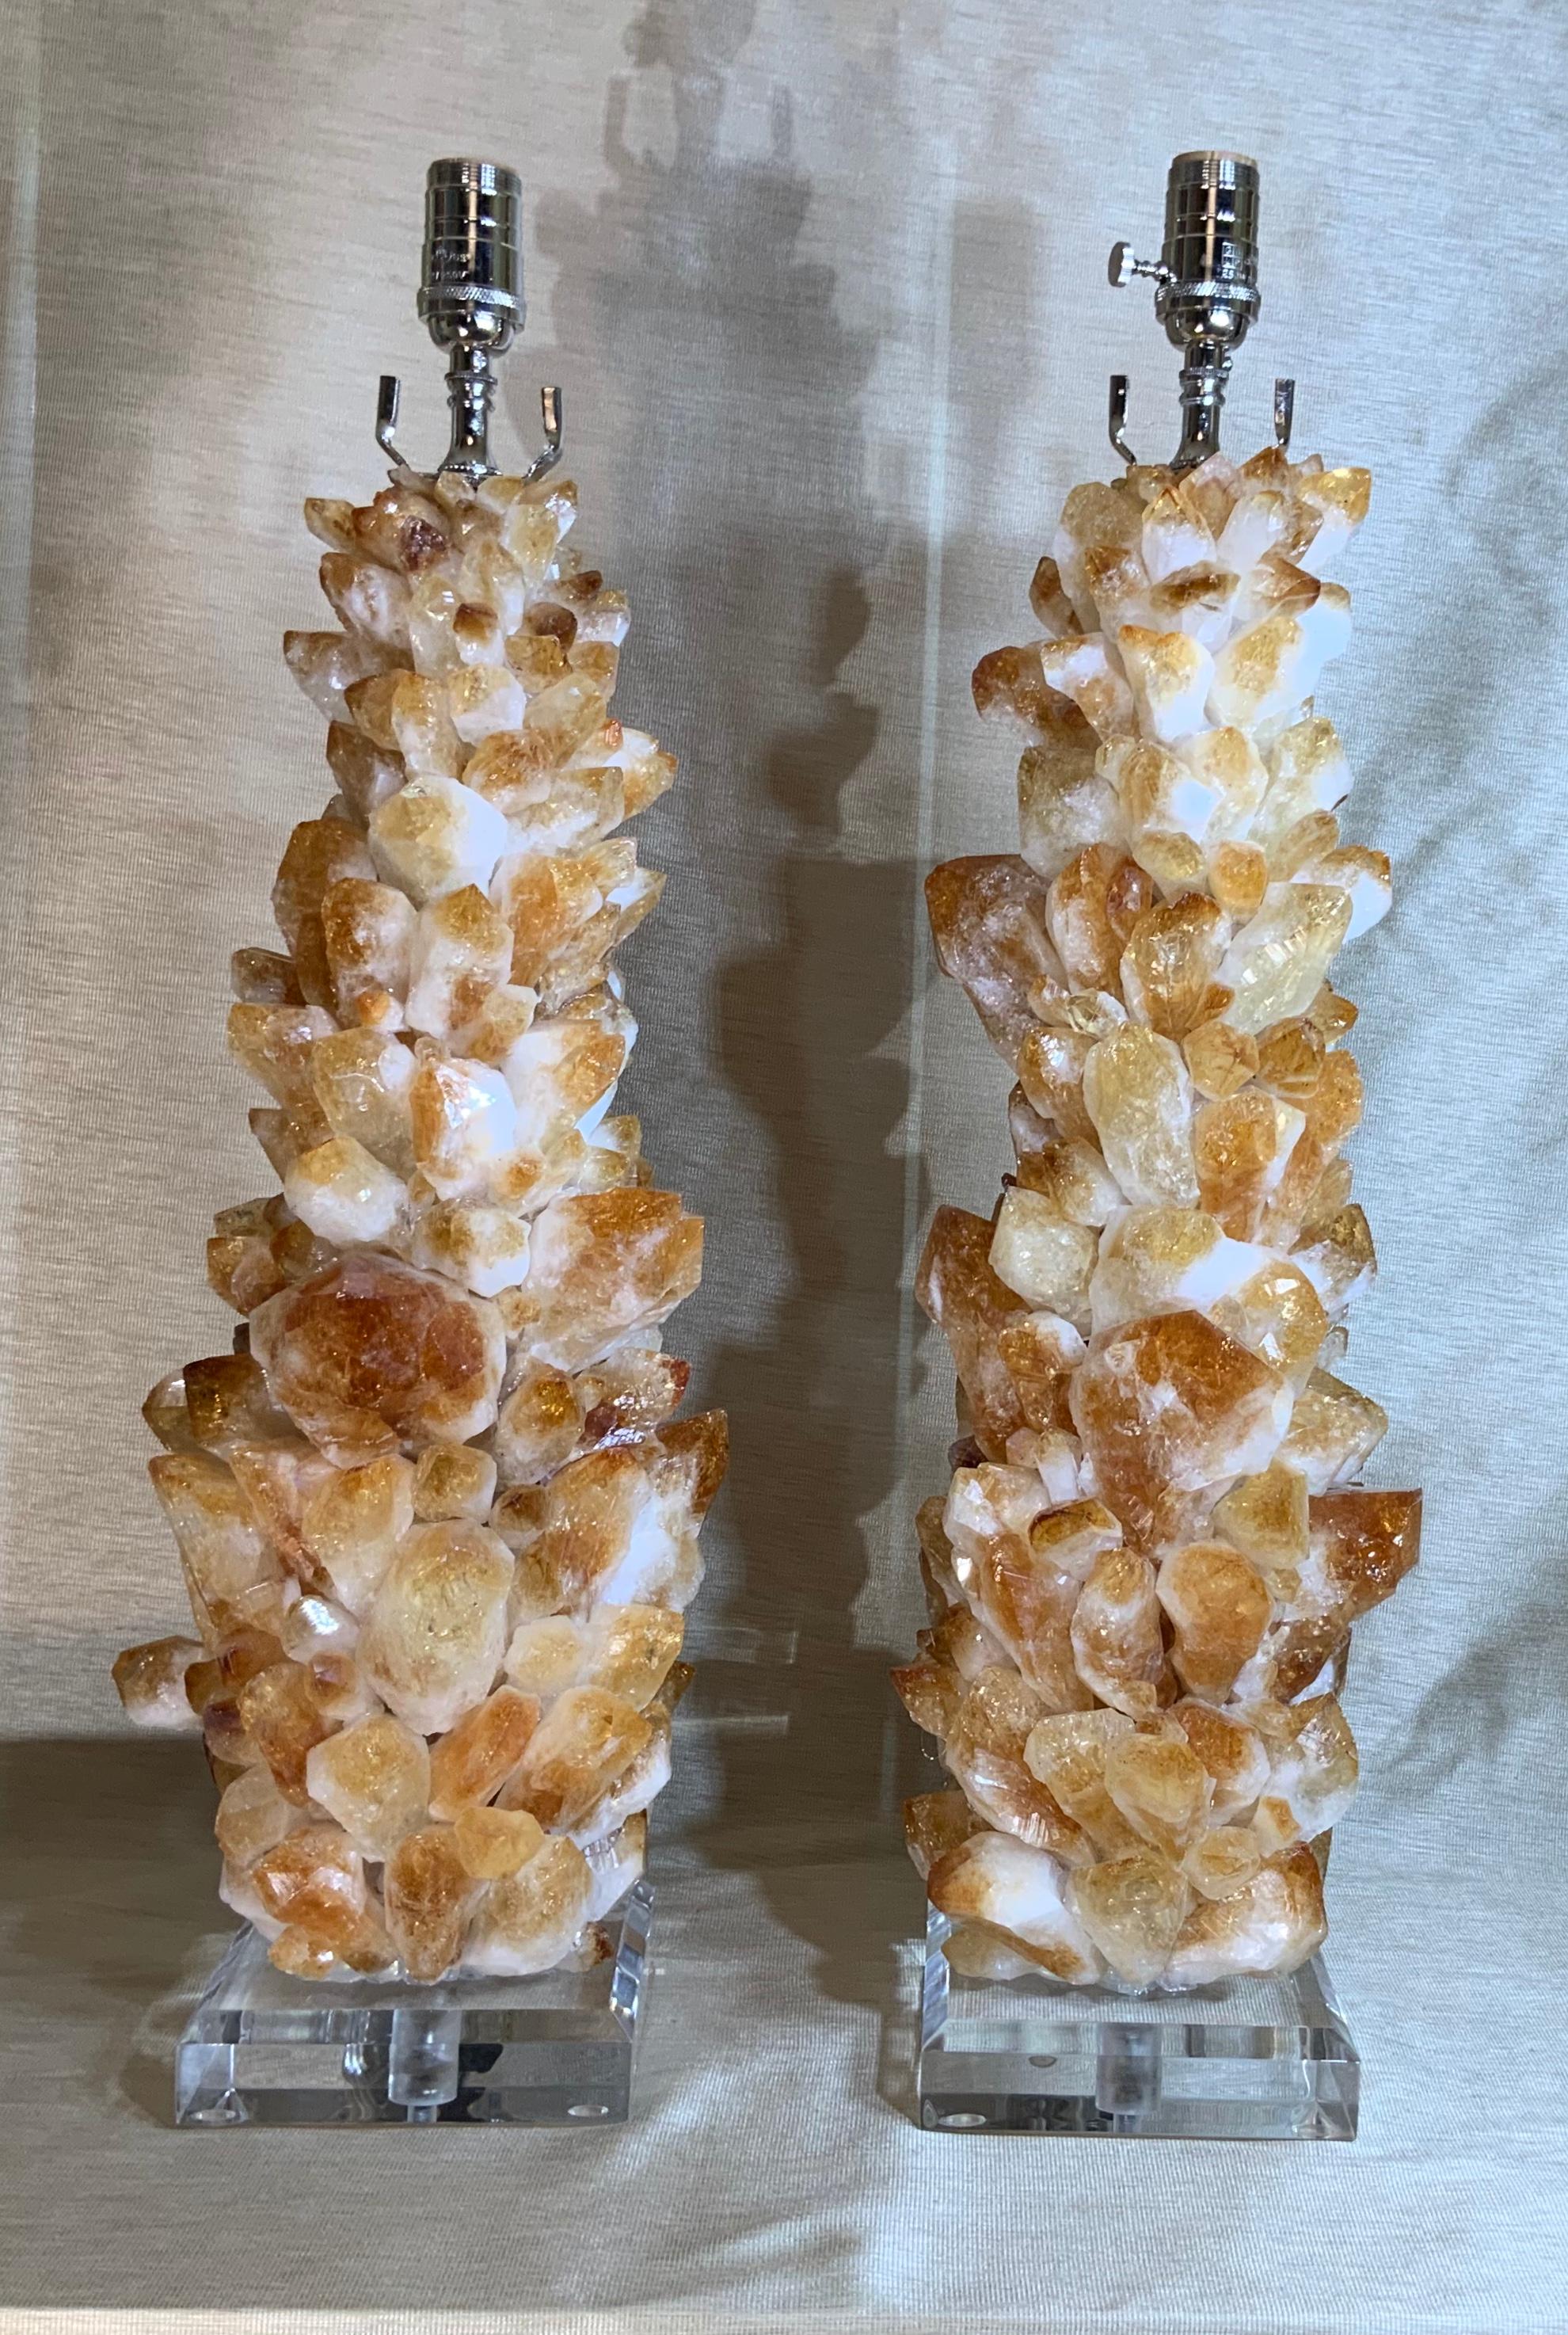 Exceptional pair of table lamps artistically handcrafted of large and smaller genuine Citrine rock quartz crystal pieces, to make beautiful and impressive pair of table lamps, one of a kind by joseph Malekan.
Beveled Lucite base 6”x 6” x